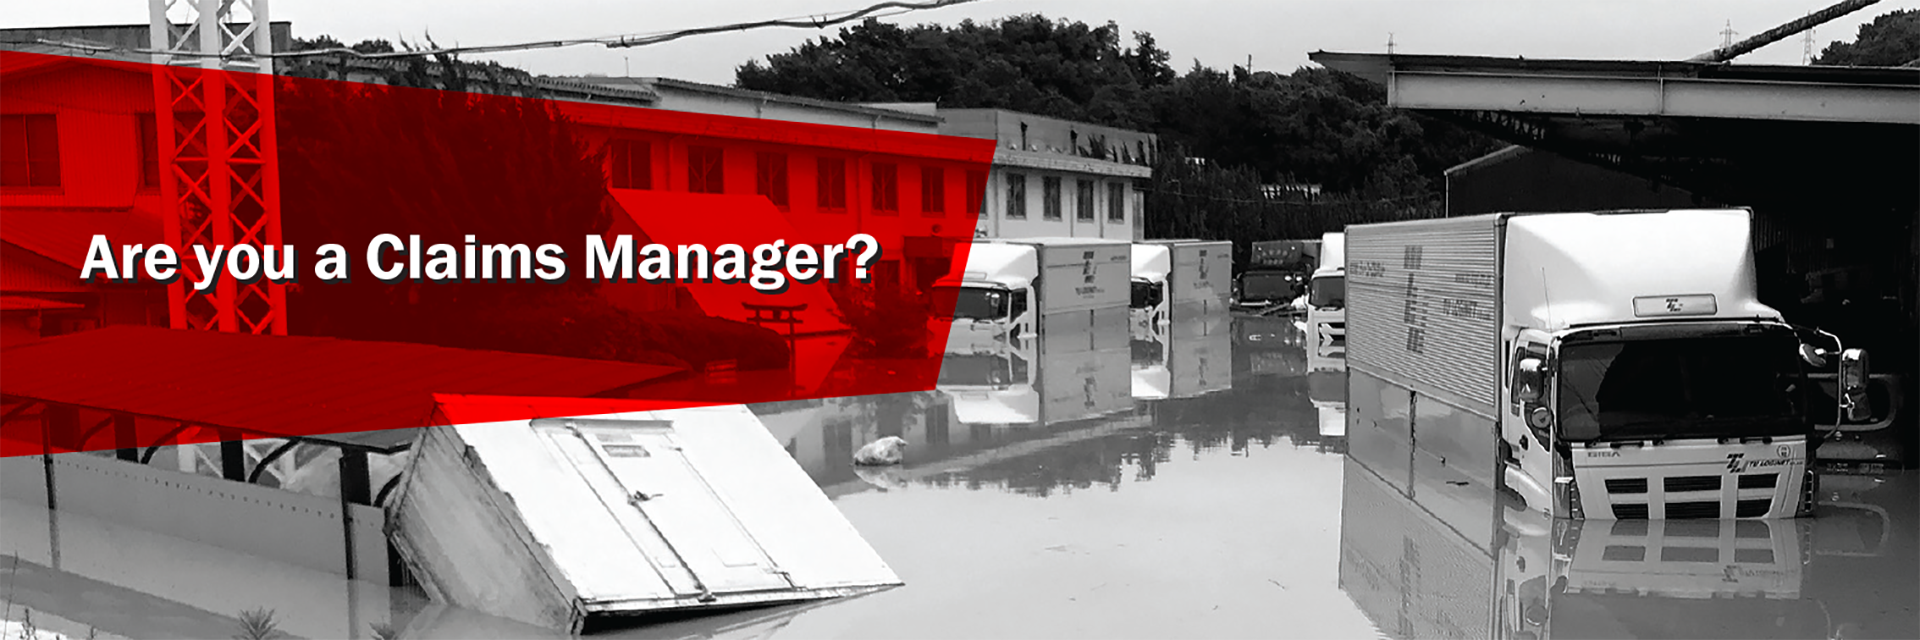 Are you a Claims Manager?